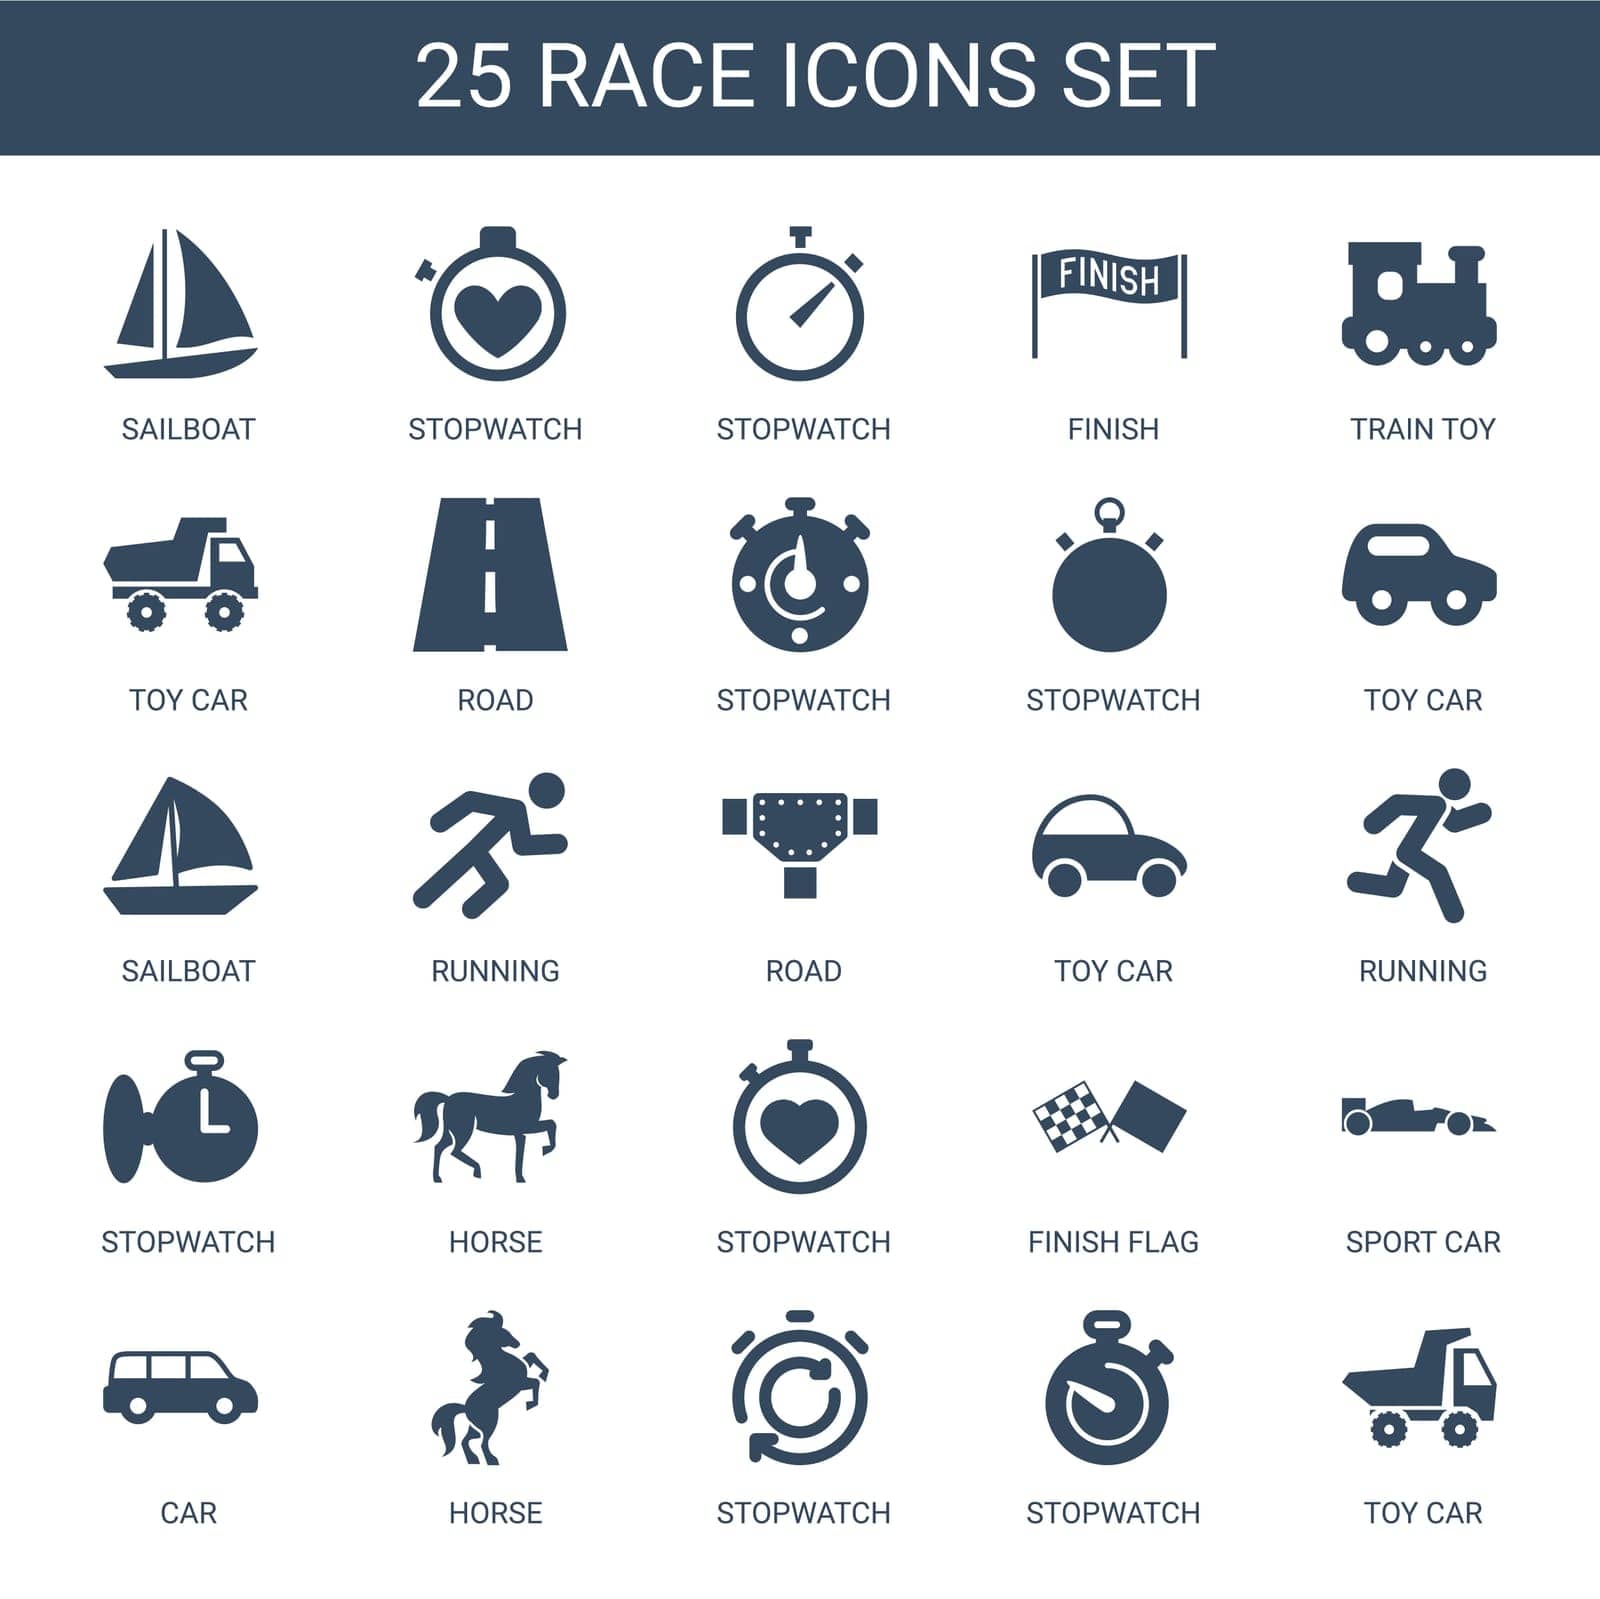 symbol,sailboat,quick,flag,concept,icon,sign,isolated,competition,speed,running,timer,white,car,road,design,finish,vector,graphic,train,toy,set,race,start,transport,clock,minute,horse,stop,watch,background,silhouette,illustration,time,drive,sport,stopwatch